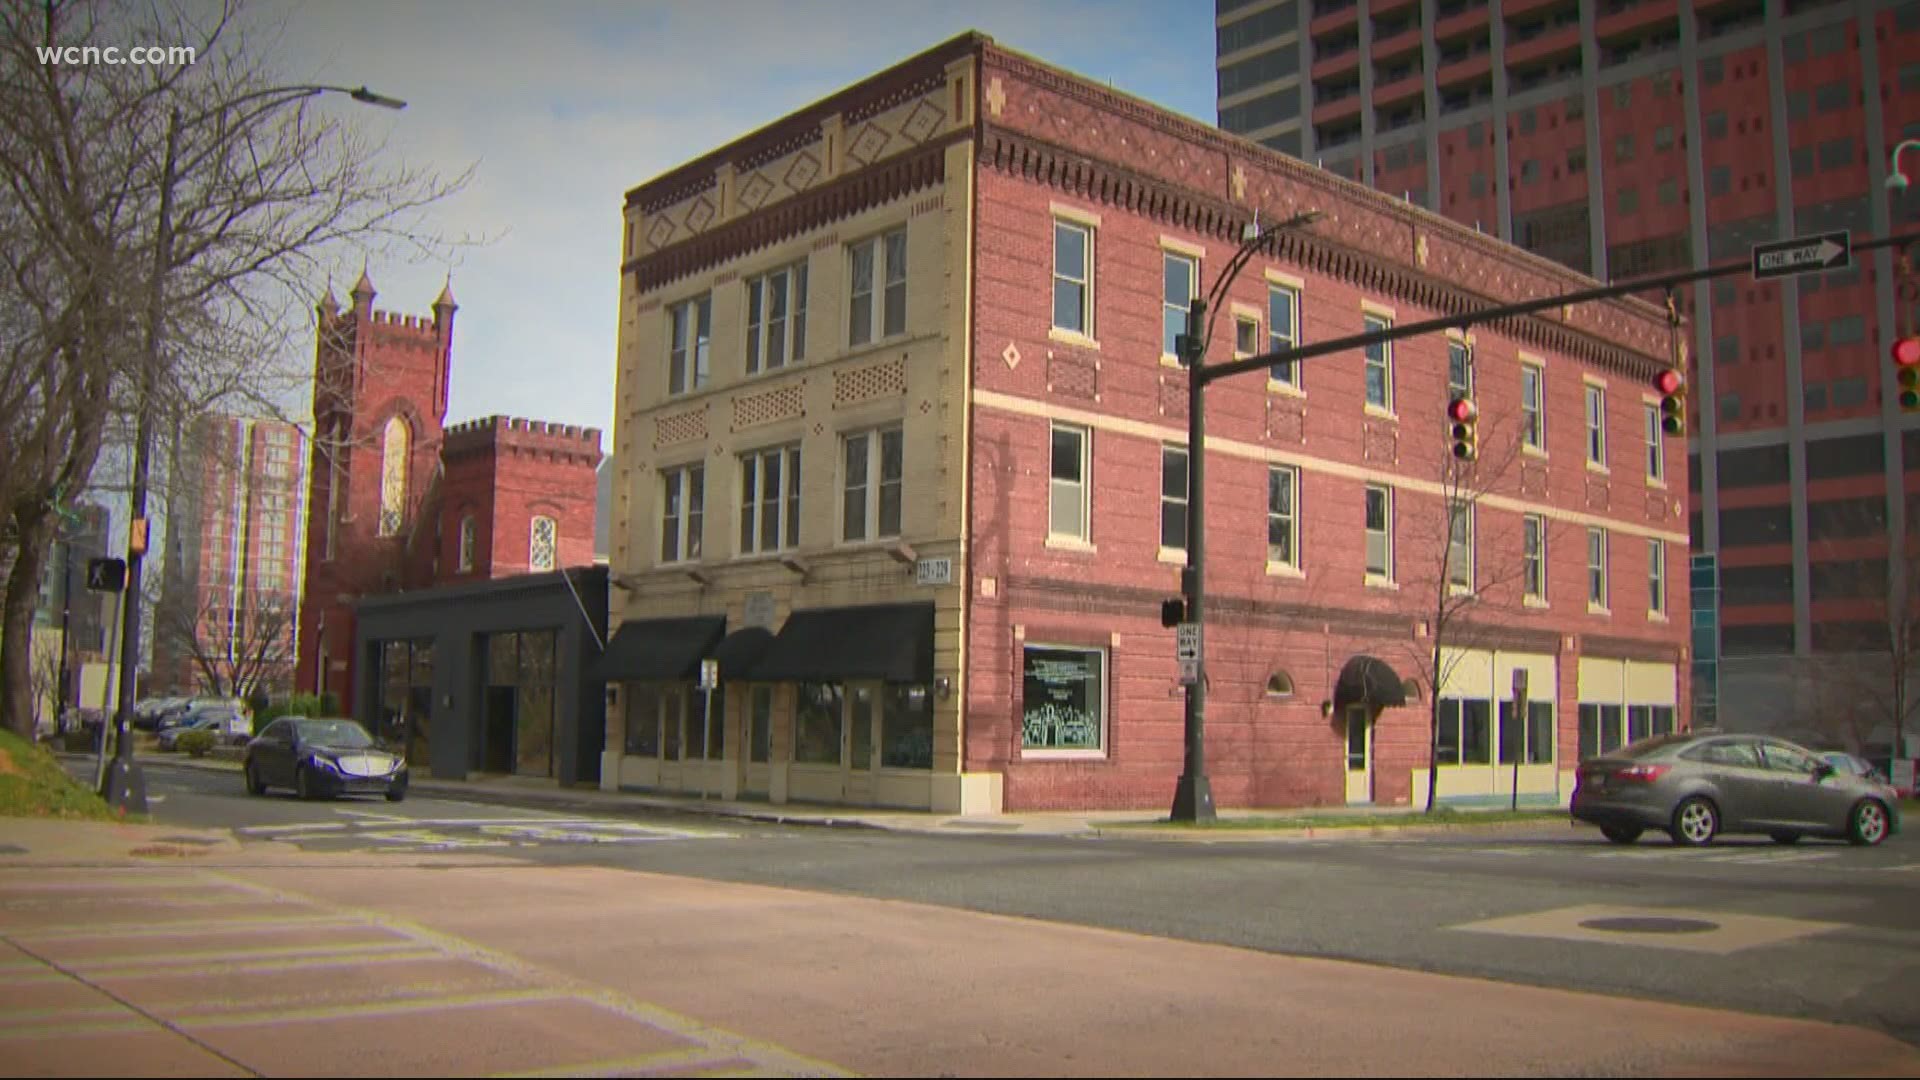 The Mecklenburg Investment Company building opened in 1922. It brought Black doctors, attorneys and businesses to the Queen City. Its impact is still felt today.